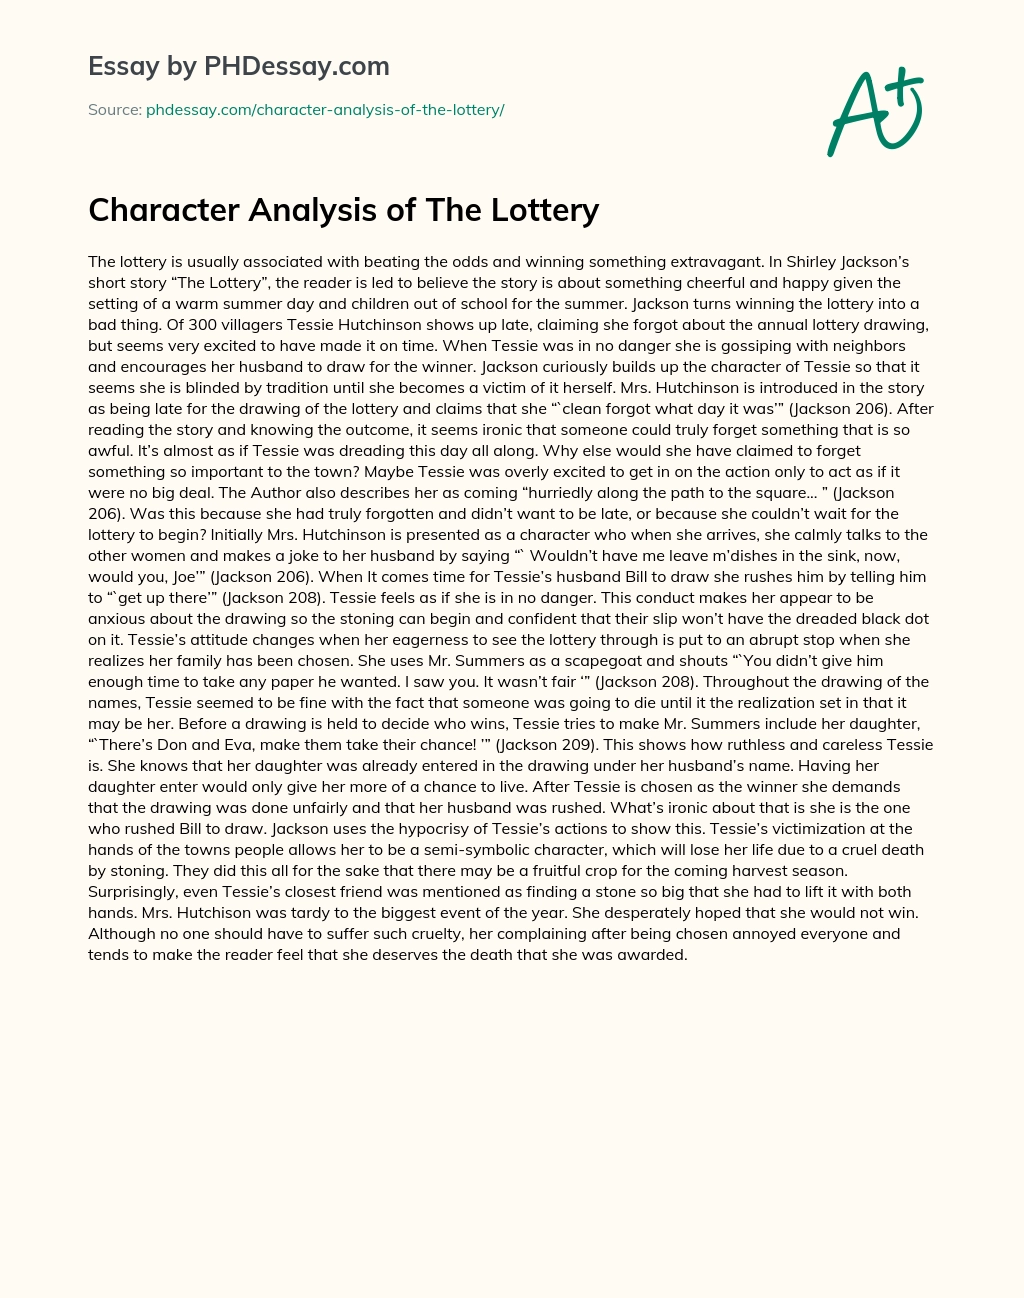 Character Analysis of The Lottery essay